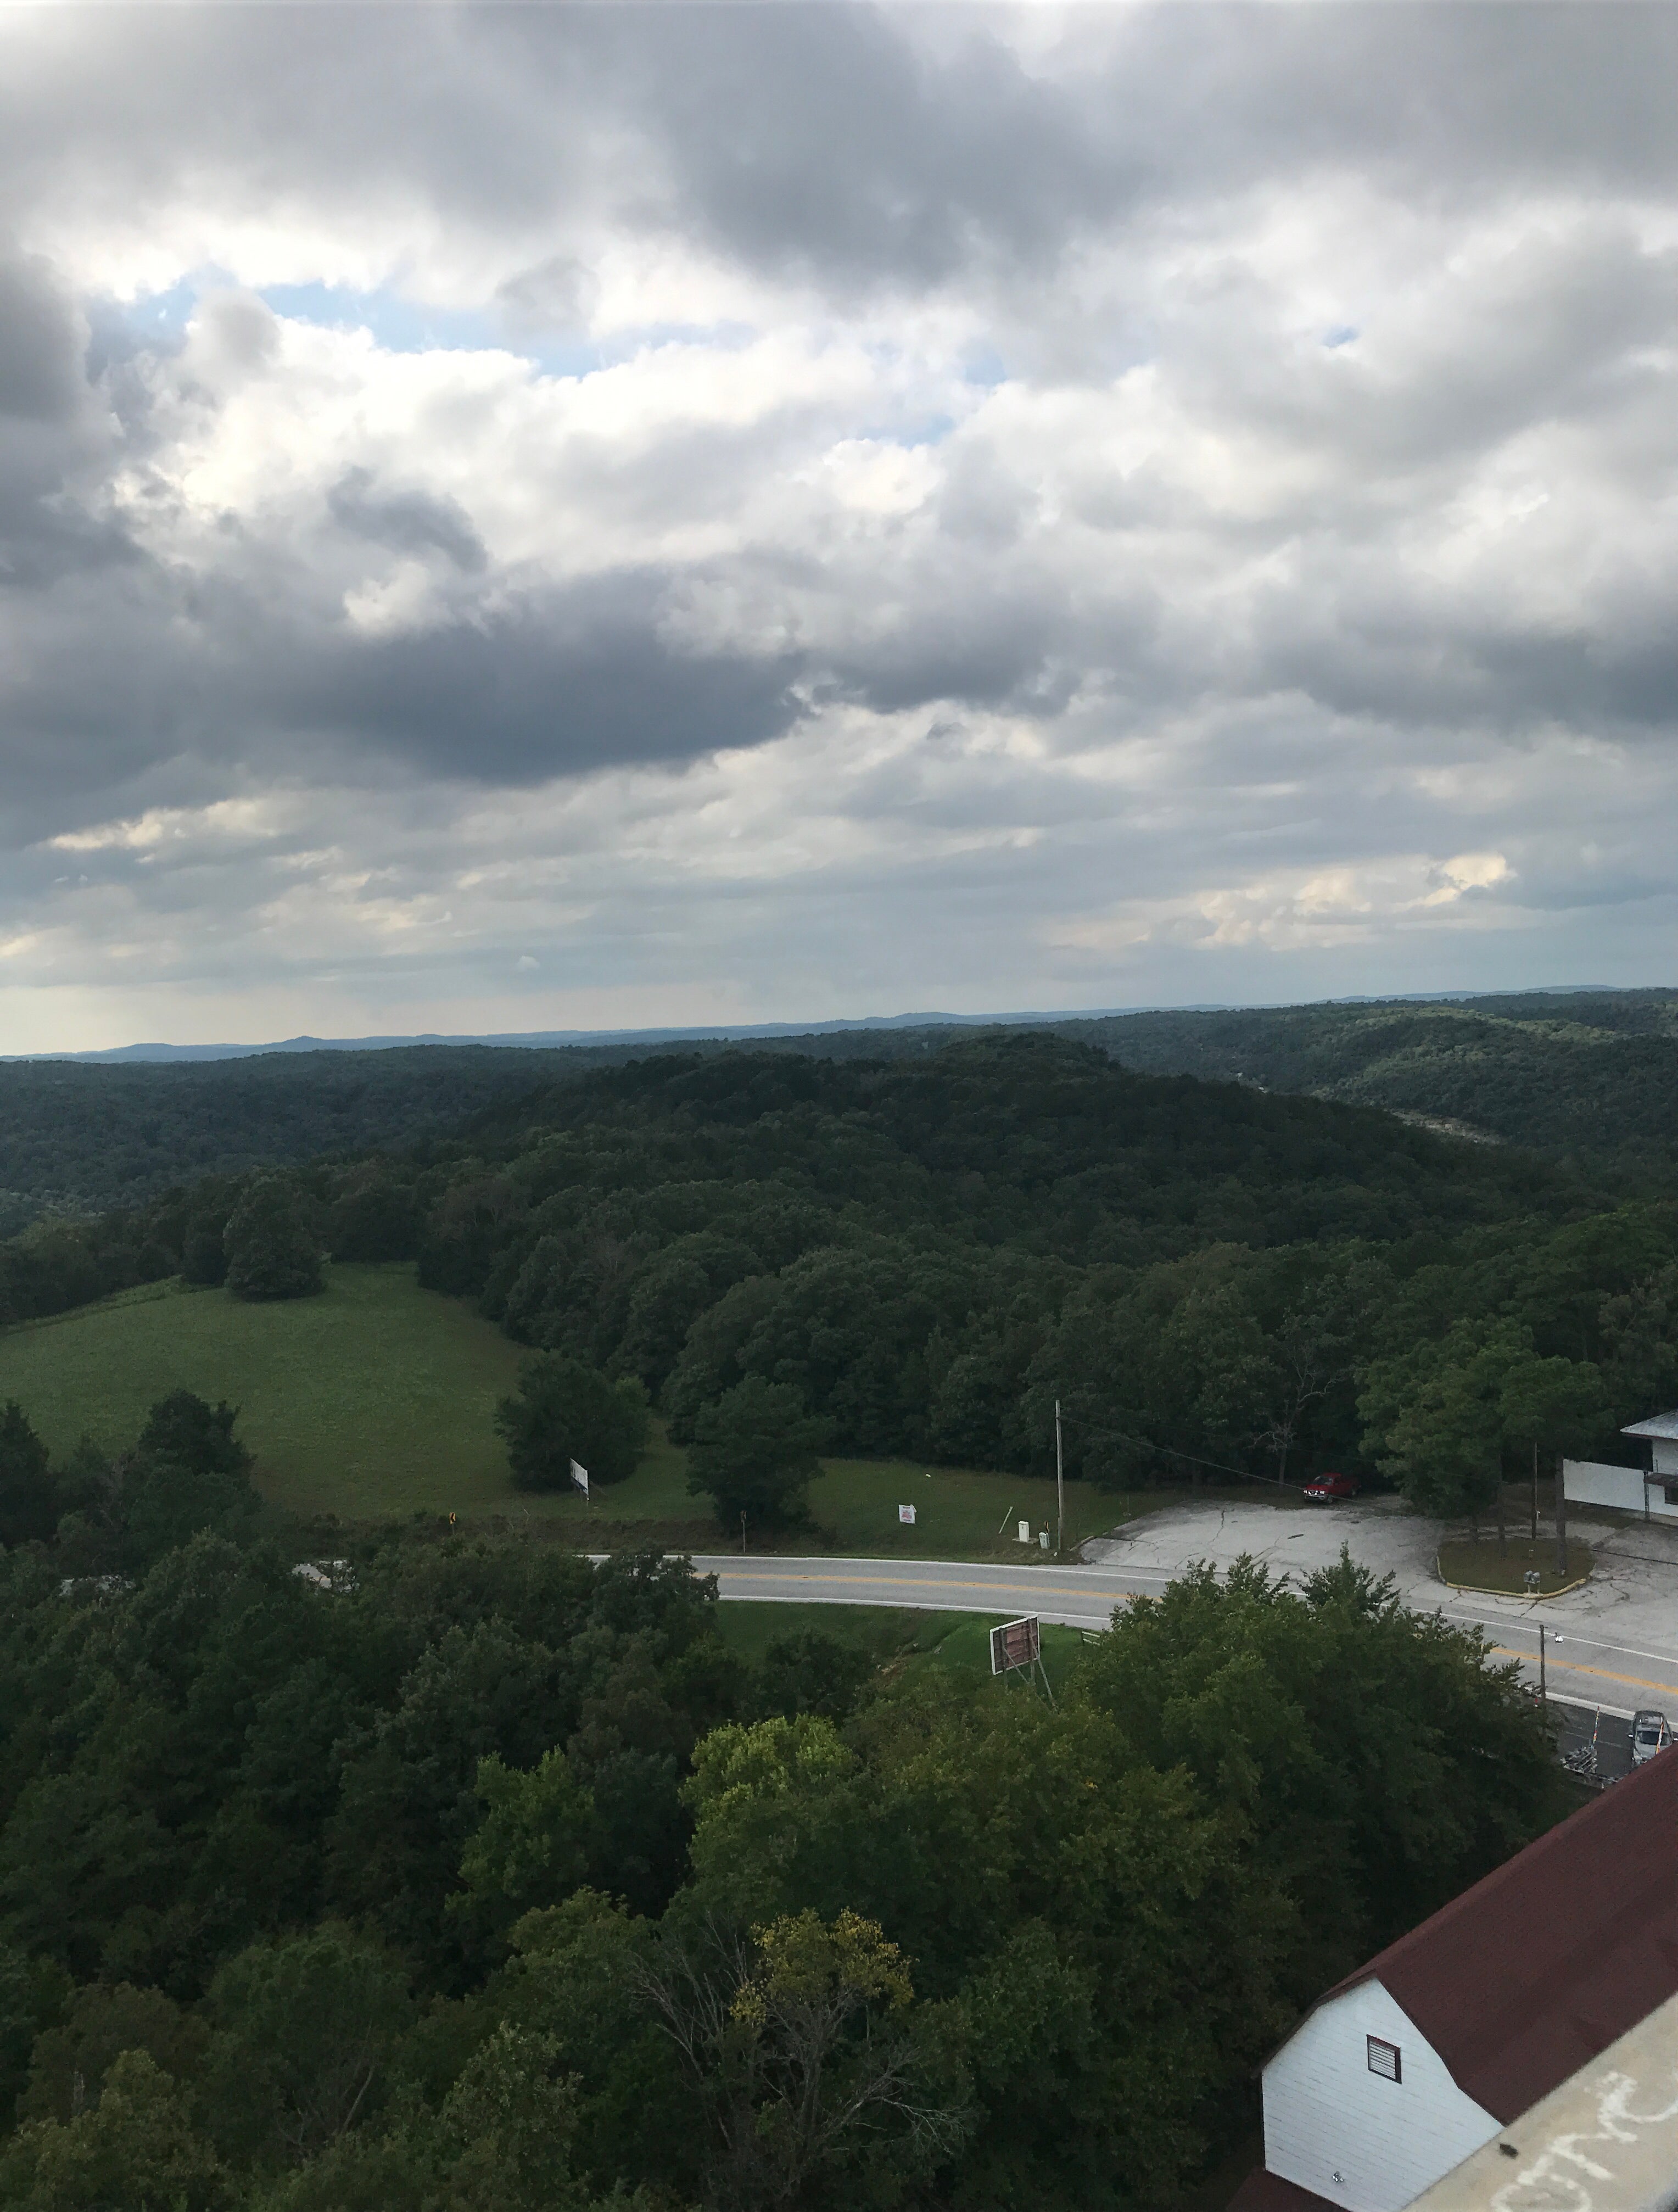 A view of the area near Lake Leatherwood, this is one of the many observation tower views you can take in while in this area.